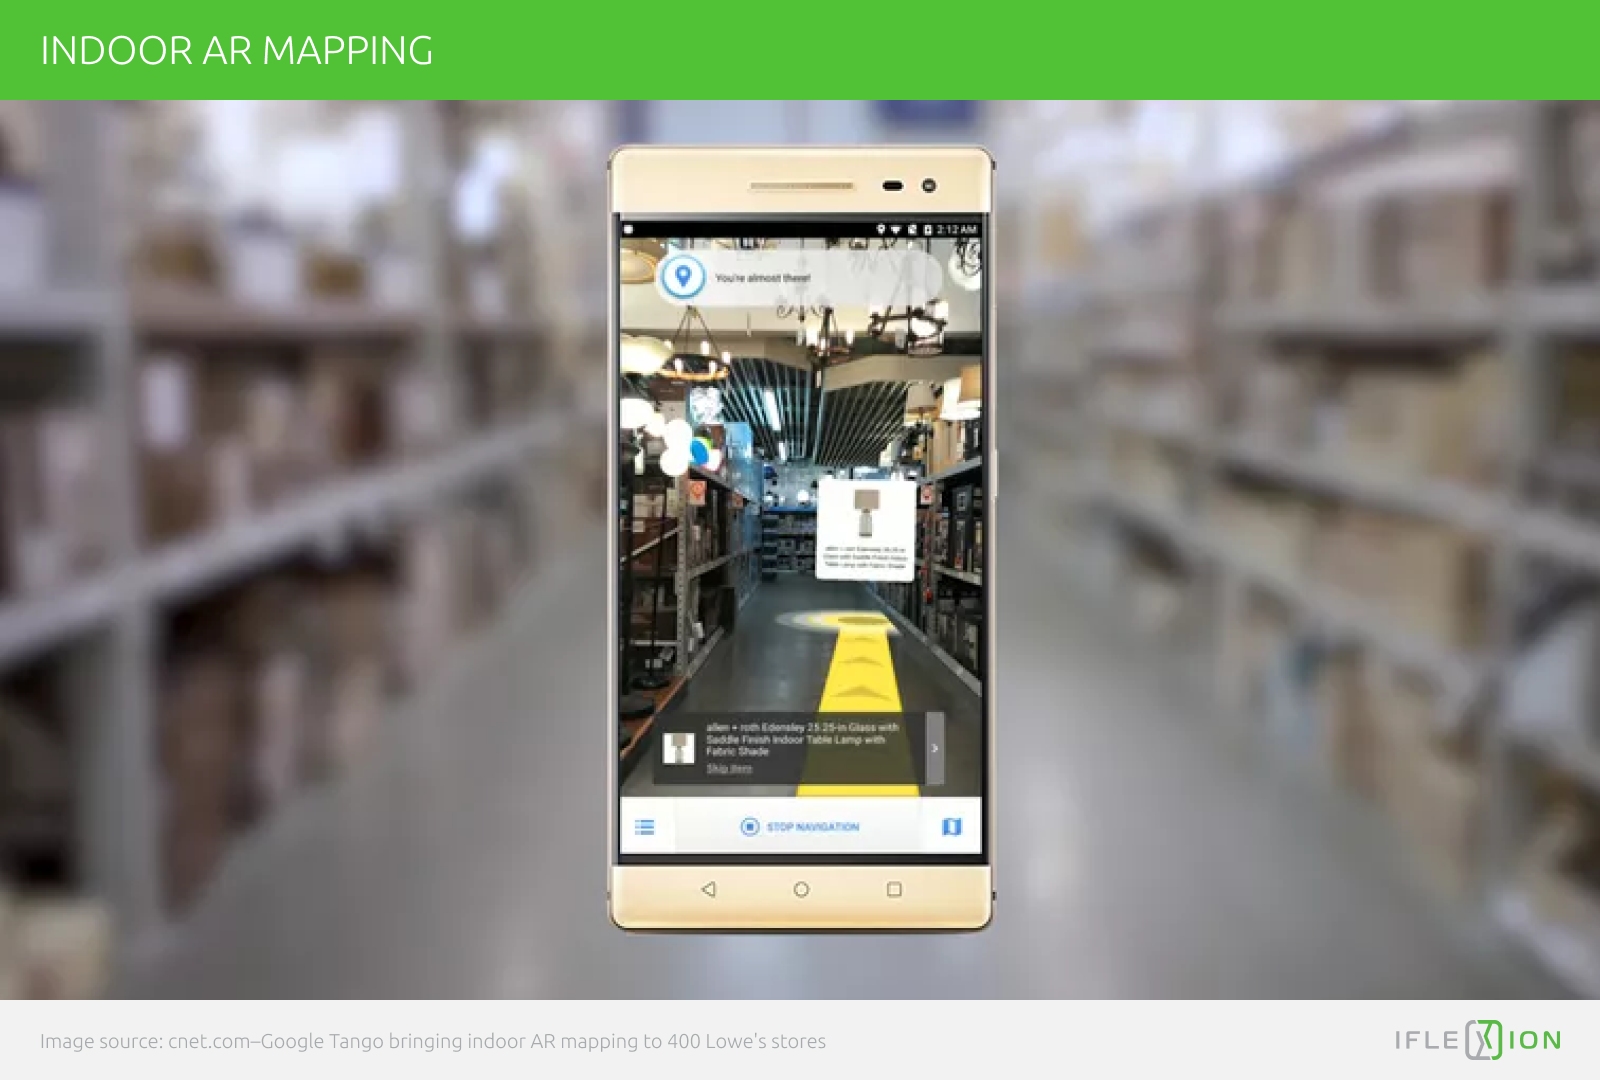  Lowe's in-store AR mapping